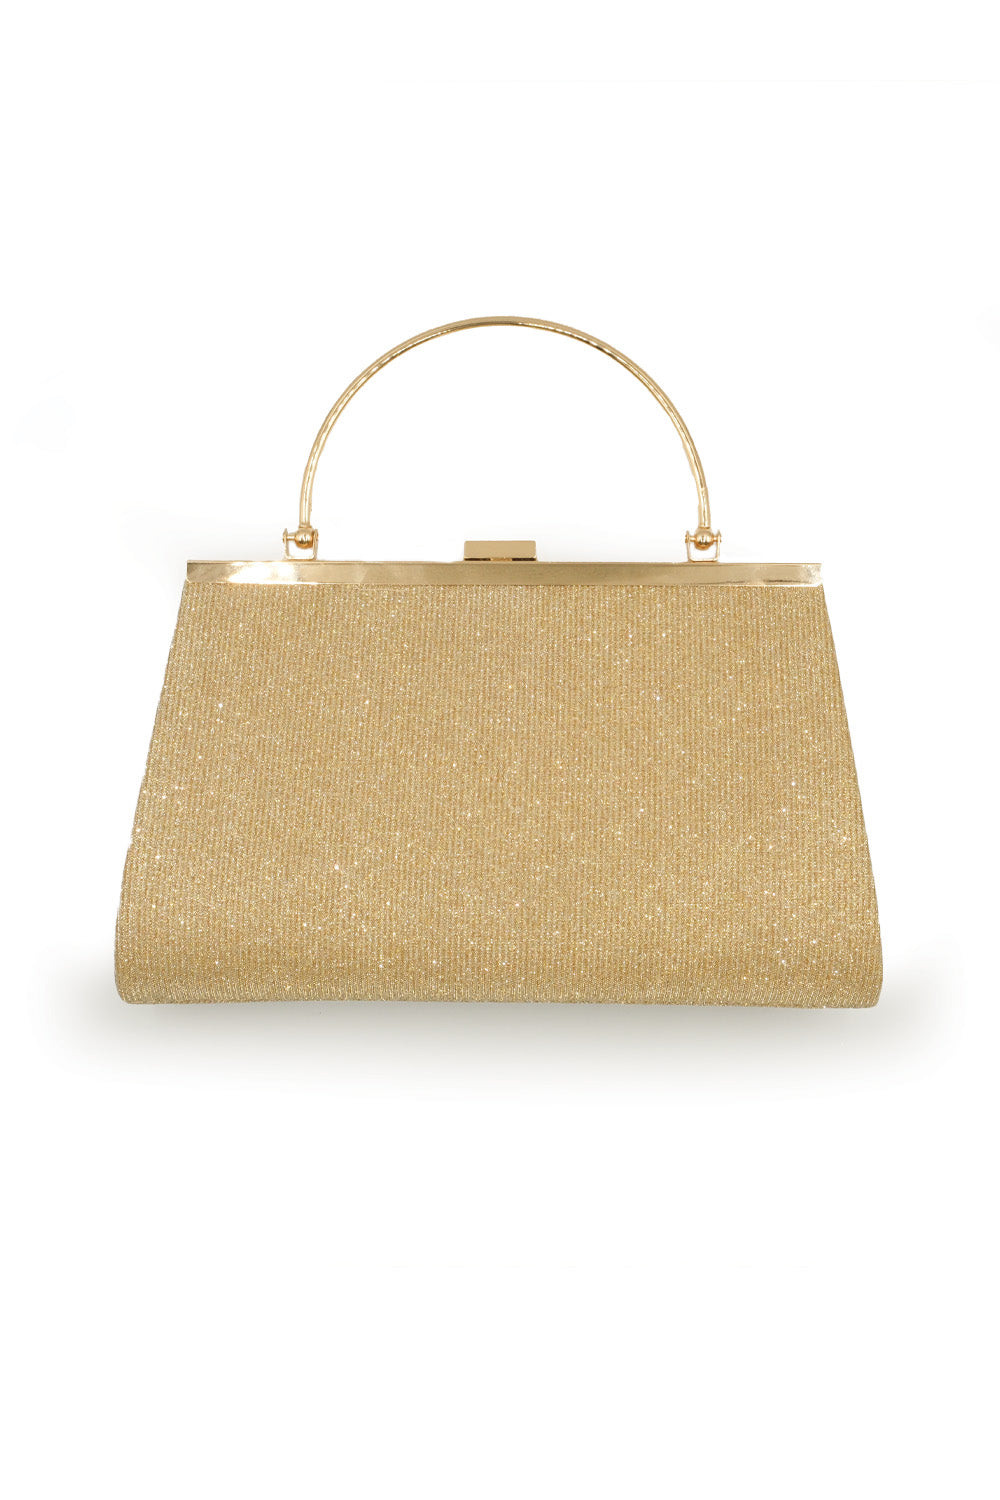 ELAINA CLUTCH WITH METAL HANDLE GRAB IN GOLD